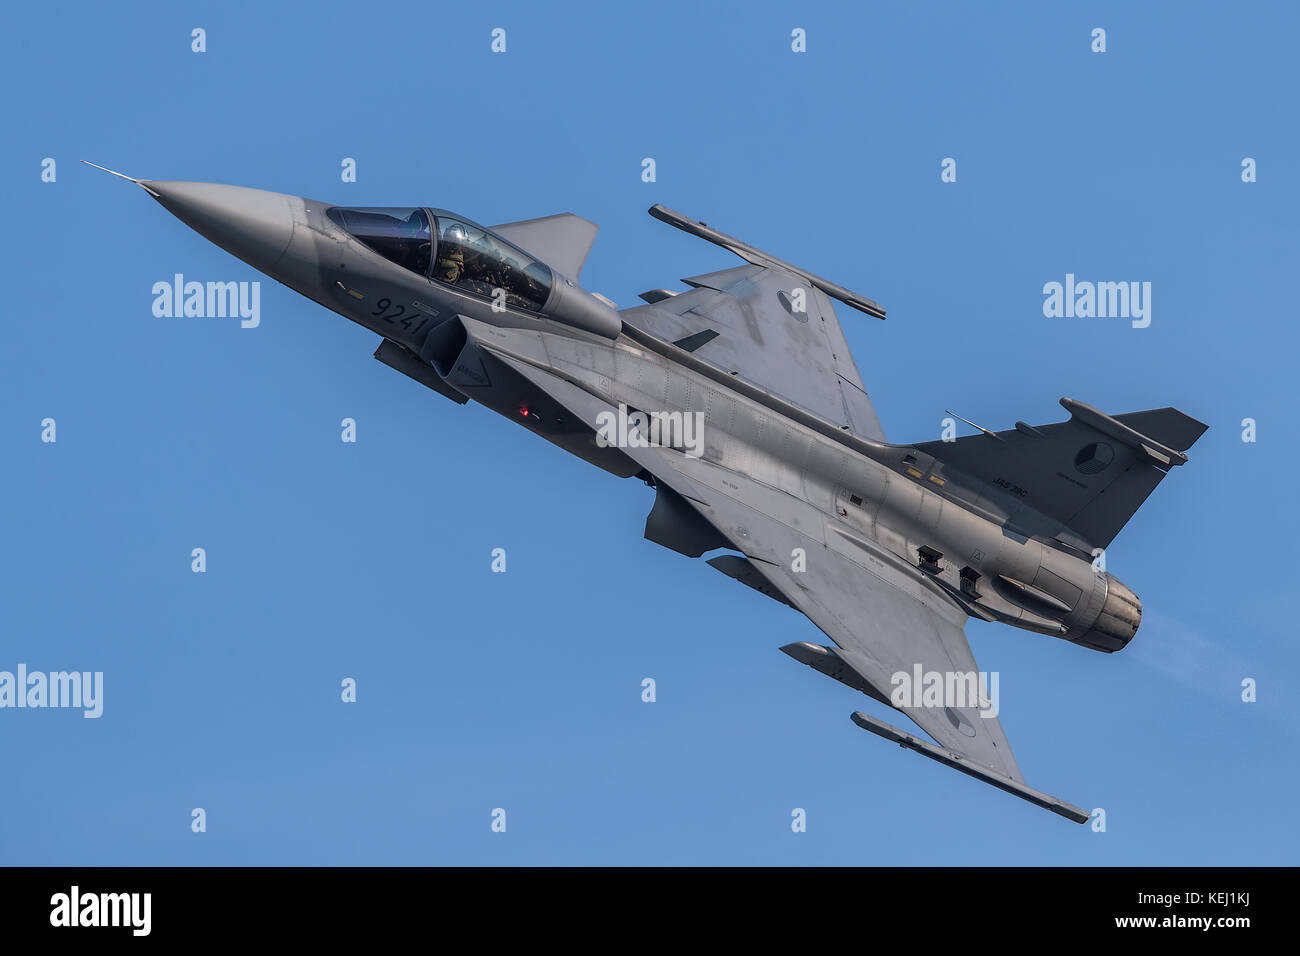 The Saab JAS 39 Gripen is a Swedish built multirole fighter. In service with the Swedish, Hungarian,Thai, South African and Czech airforces. Stock Photo